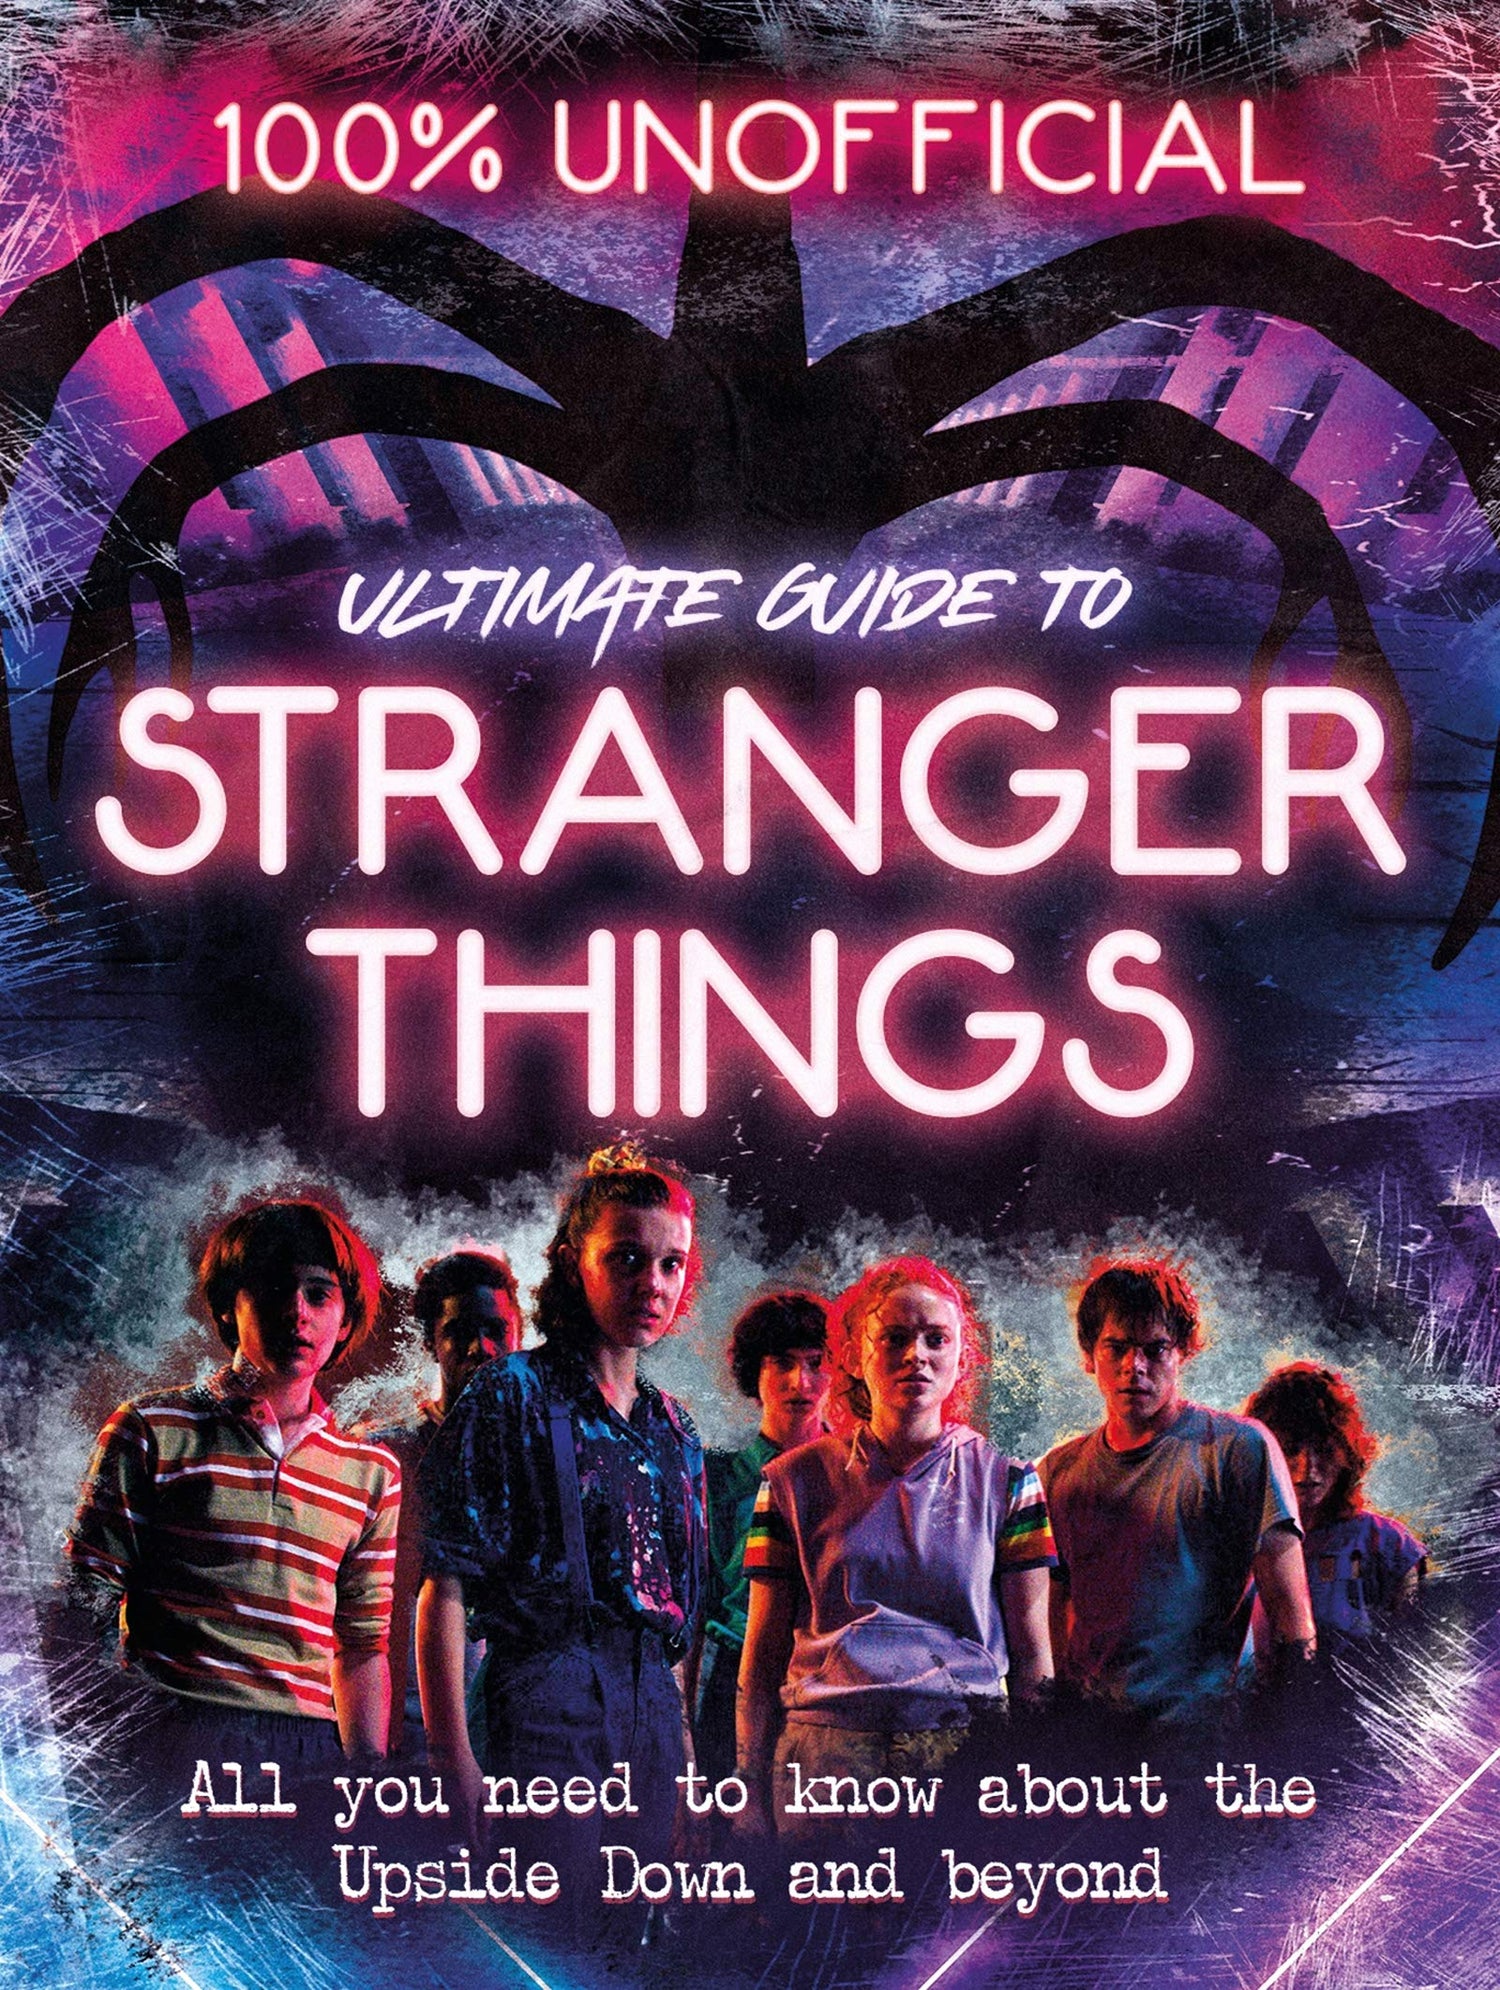 Stranger Things: 100% Unofficial - The Ultimate Guide To Stranger